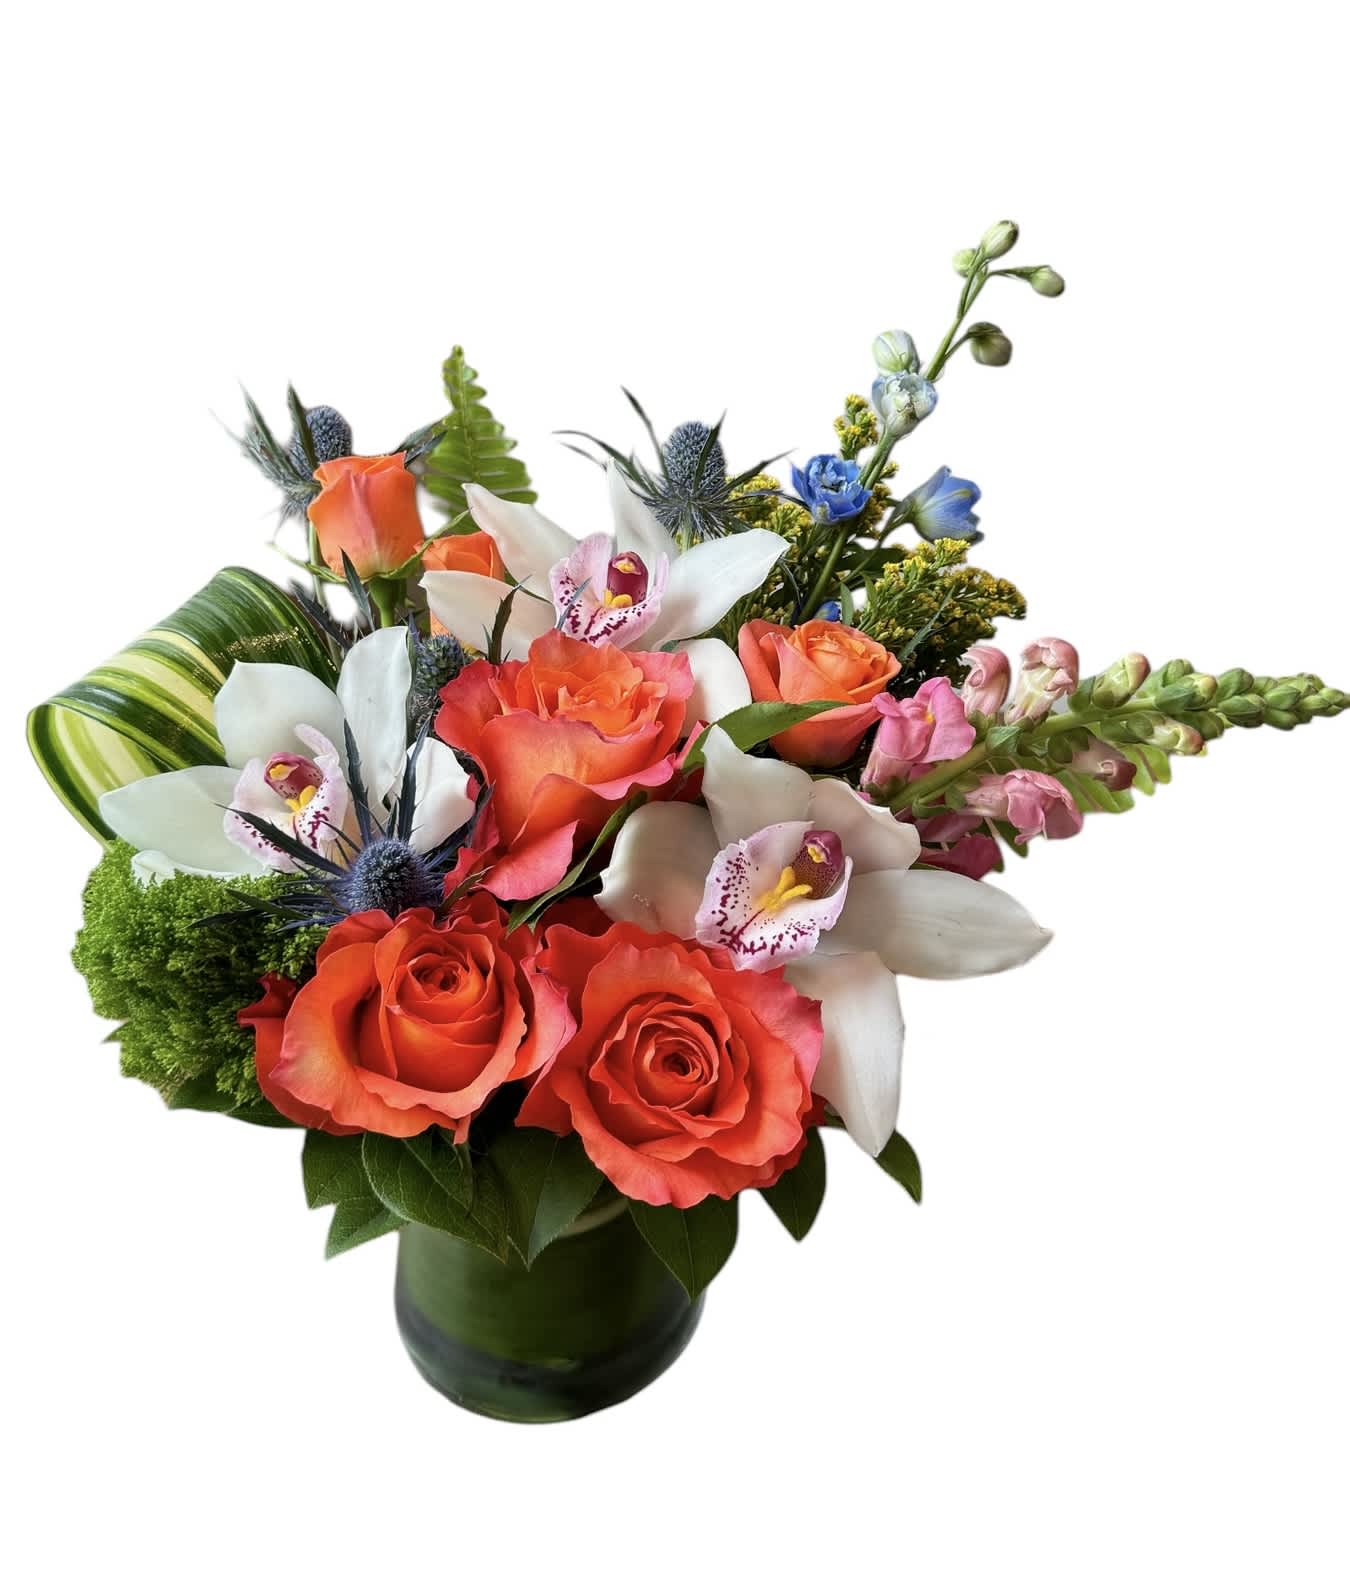 Bright Spring  - Orange roses, white cymbidium orchids, orange spray rose, blue thistle, blue delphinium, pink snapdragon, aster and greens filled in a glass vase. 